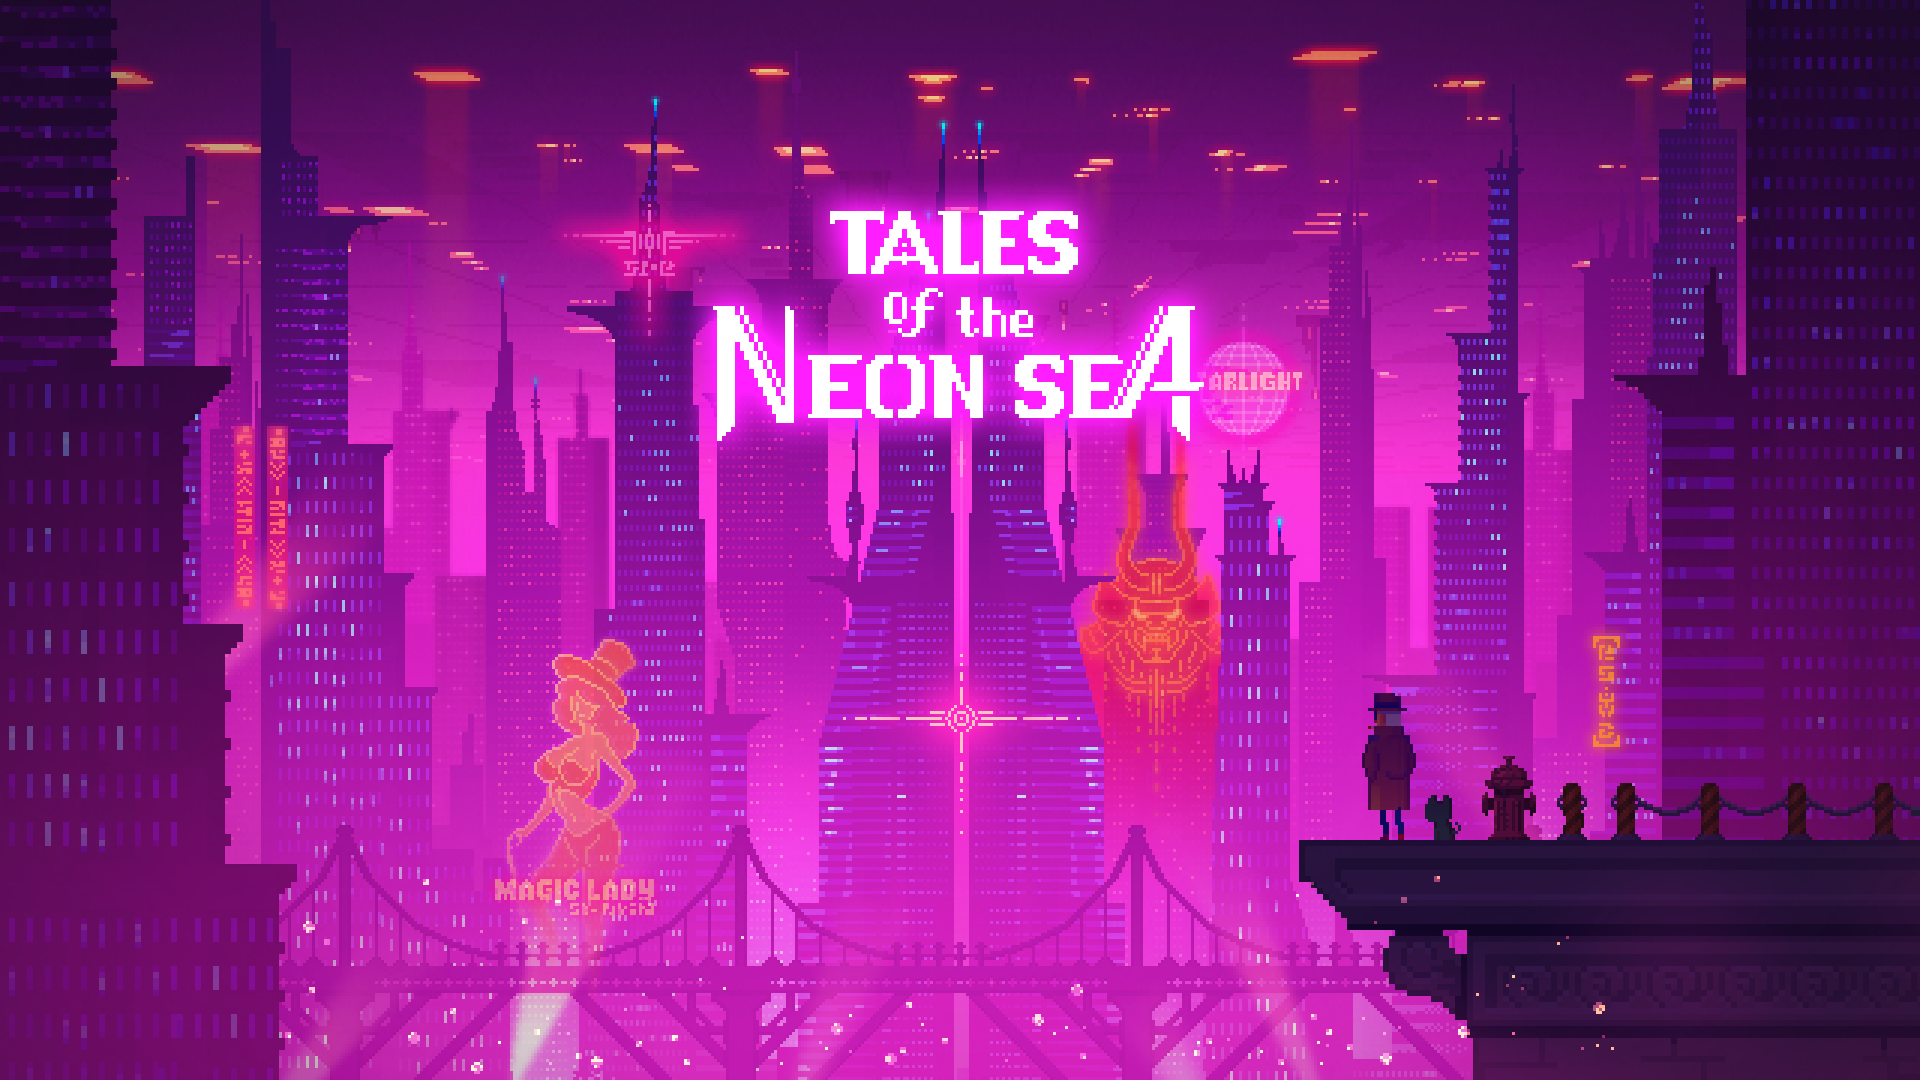 Video Game Tales of the Neon Sea HD Wallpaper | Background Image